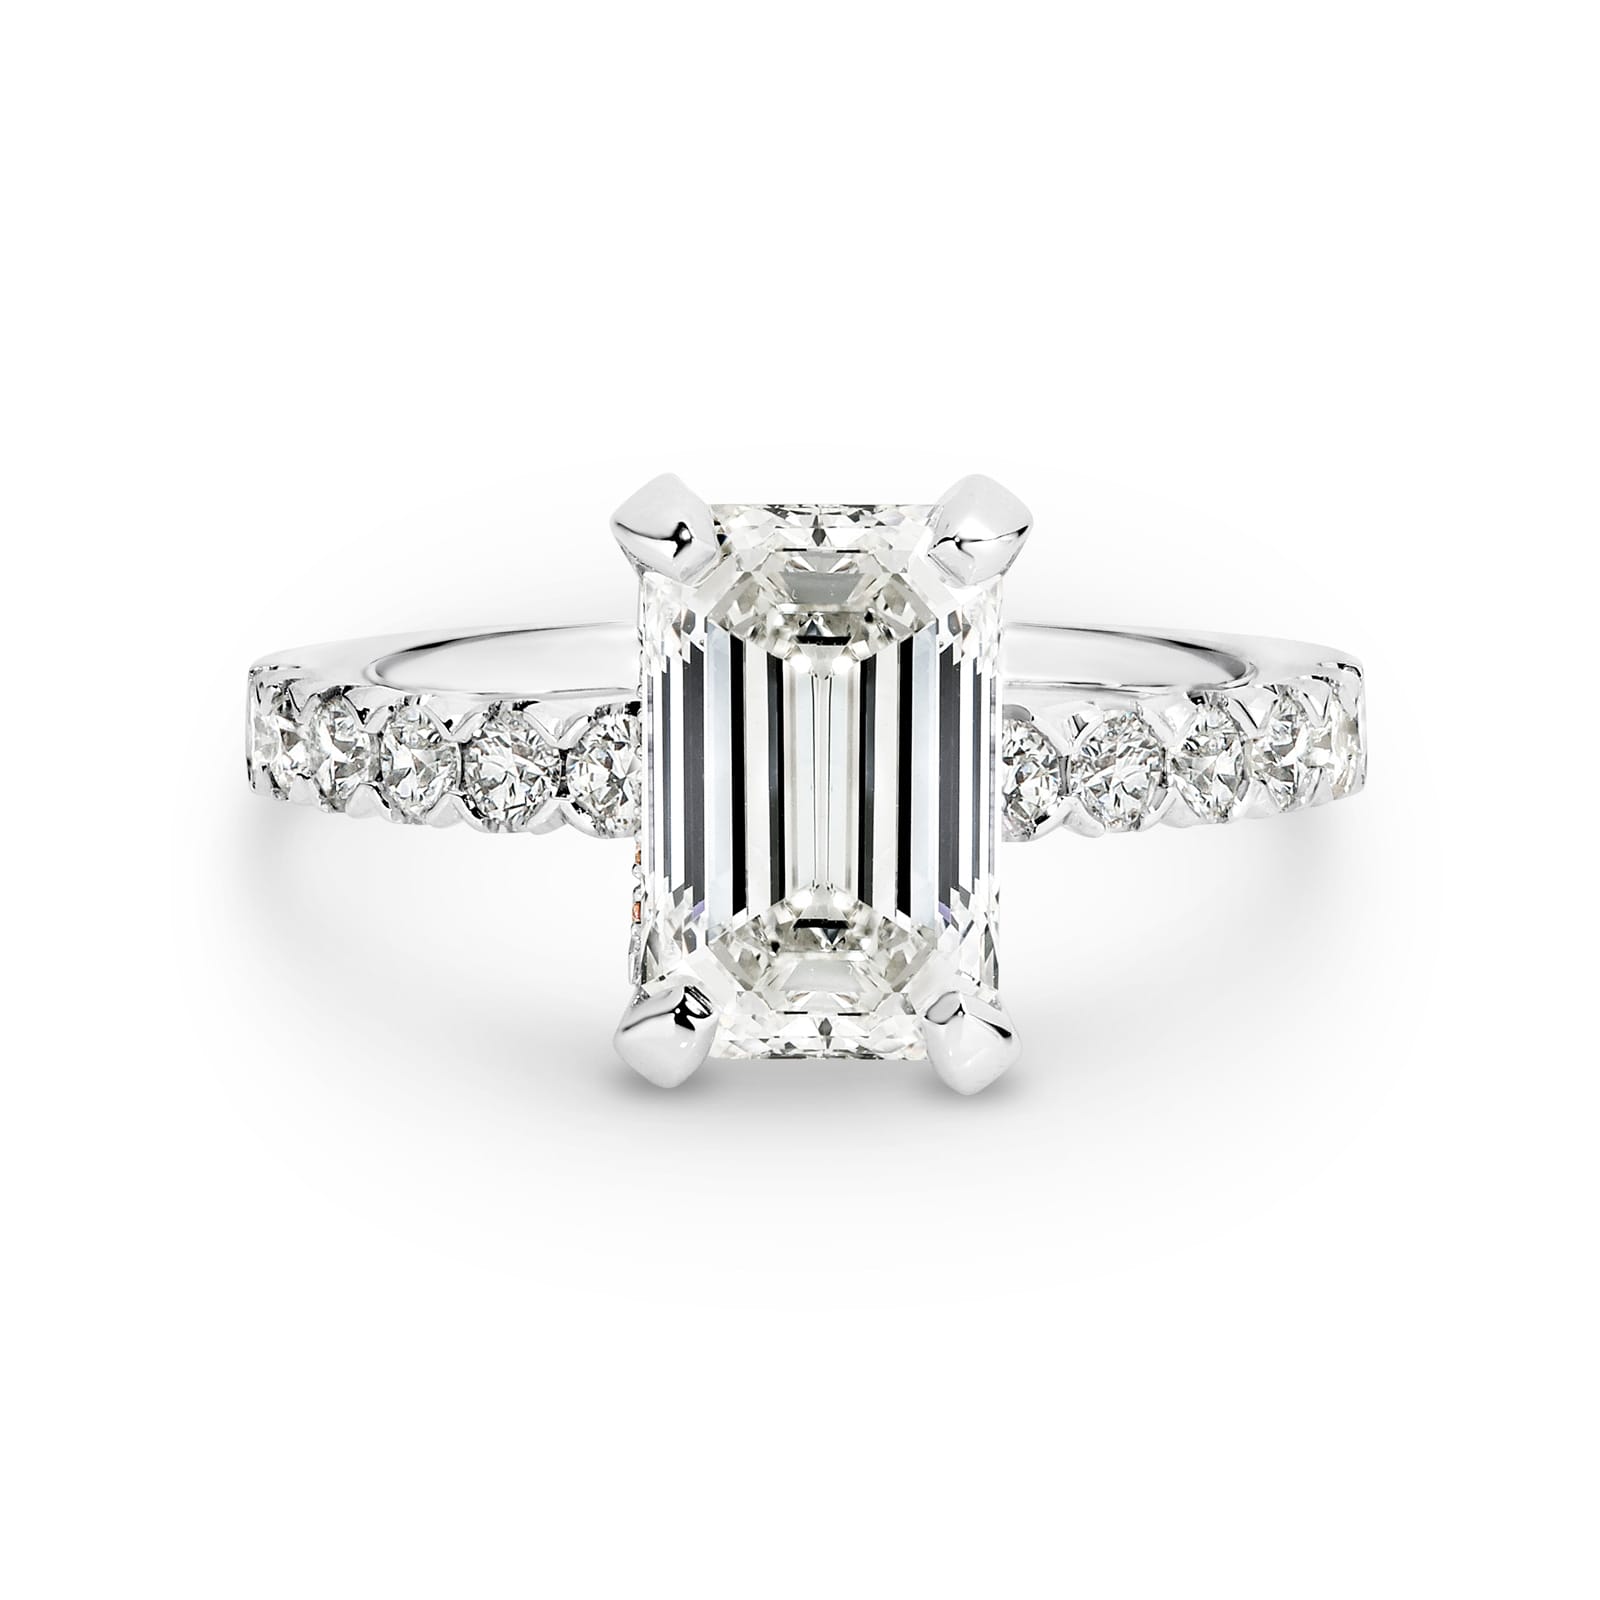 Athena features a 3.02 carat Emerald-cut solitaire diamond, handcrafted in platinum and supported by 12 round brilliant cut diamonds in the band totalling 0.48ct. Athena is softened by a fine ribbon of rose gold around the white diamond, delicately set with rare Argyle pink diamonds. She was designed and handcrafted by LeGassick's Master Jewellers, Gold Coast, Australia.